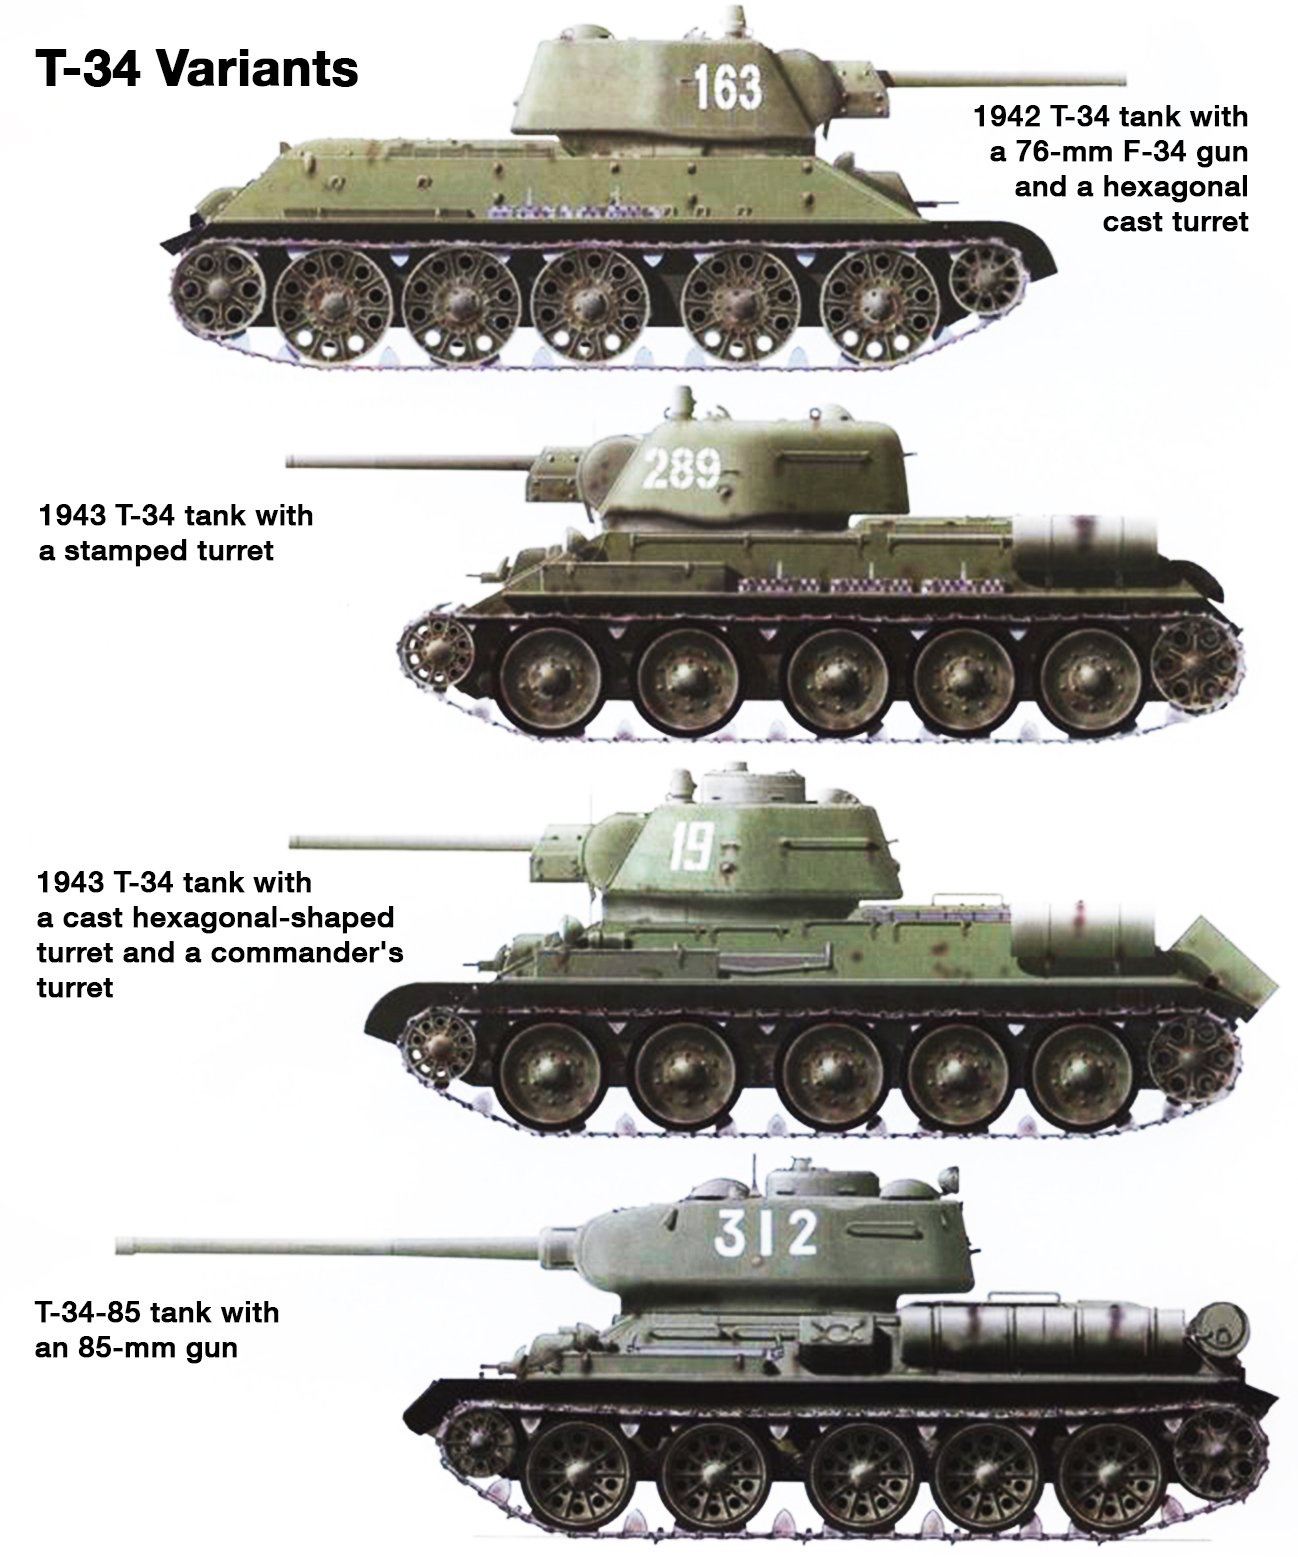 An image of four variants of the T-34 tank from 1942 to 1944 showing their different turrets, guns, and identification numbers on a white background. 1942 T-34 tank with a 76-mm F-34 gun and a cast turret of hexagonal shape. 1943 T-34 tank with a stamped turret. 1943 T-34 tank with a cast hexagonal-shaped turret and a commander's turret. T-34-85 tank with an 85-mm gun.